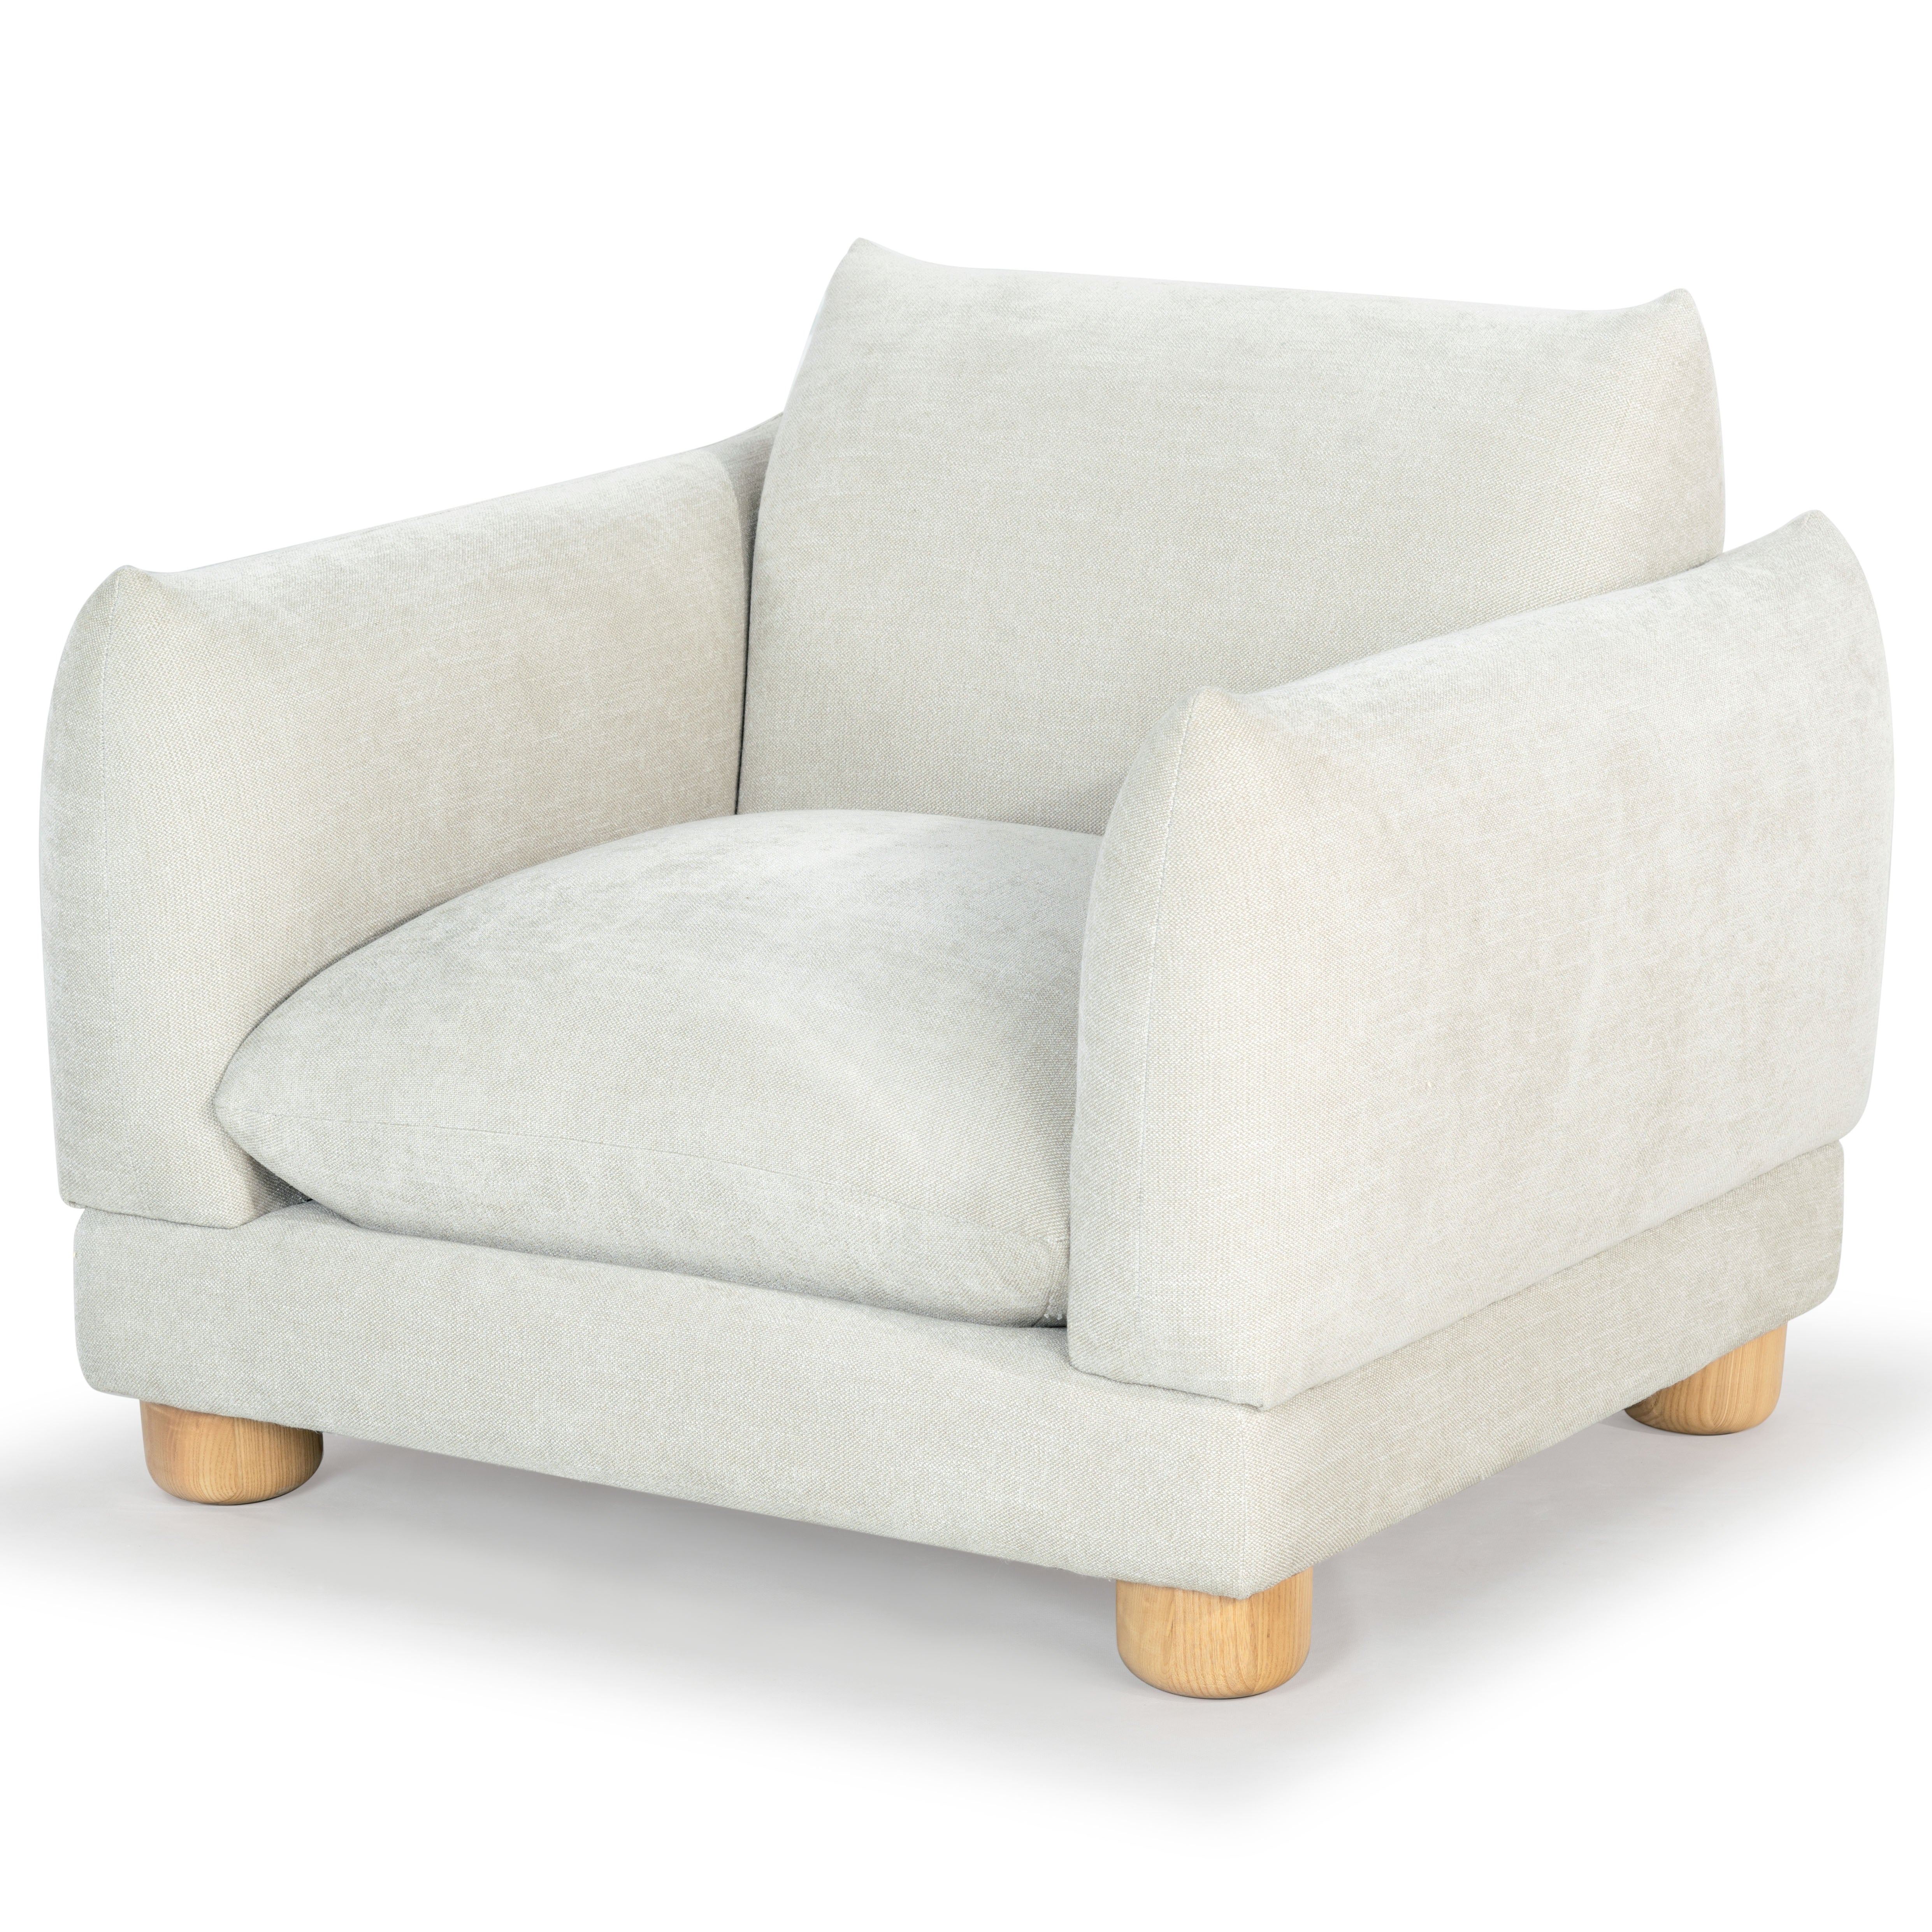 Safavieh Couture Marysa Accent Chair, SFV4603 - Beige / Natural